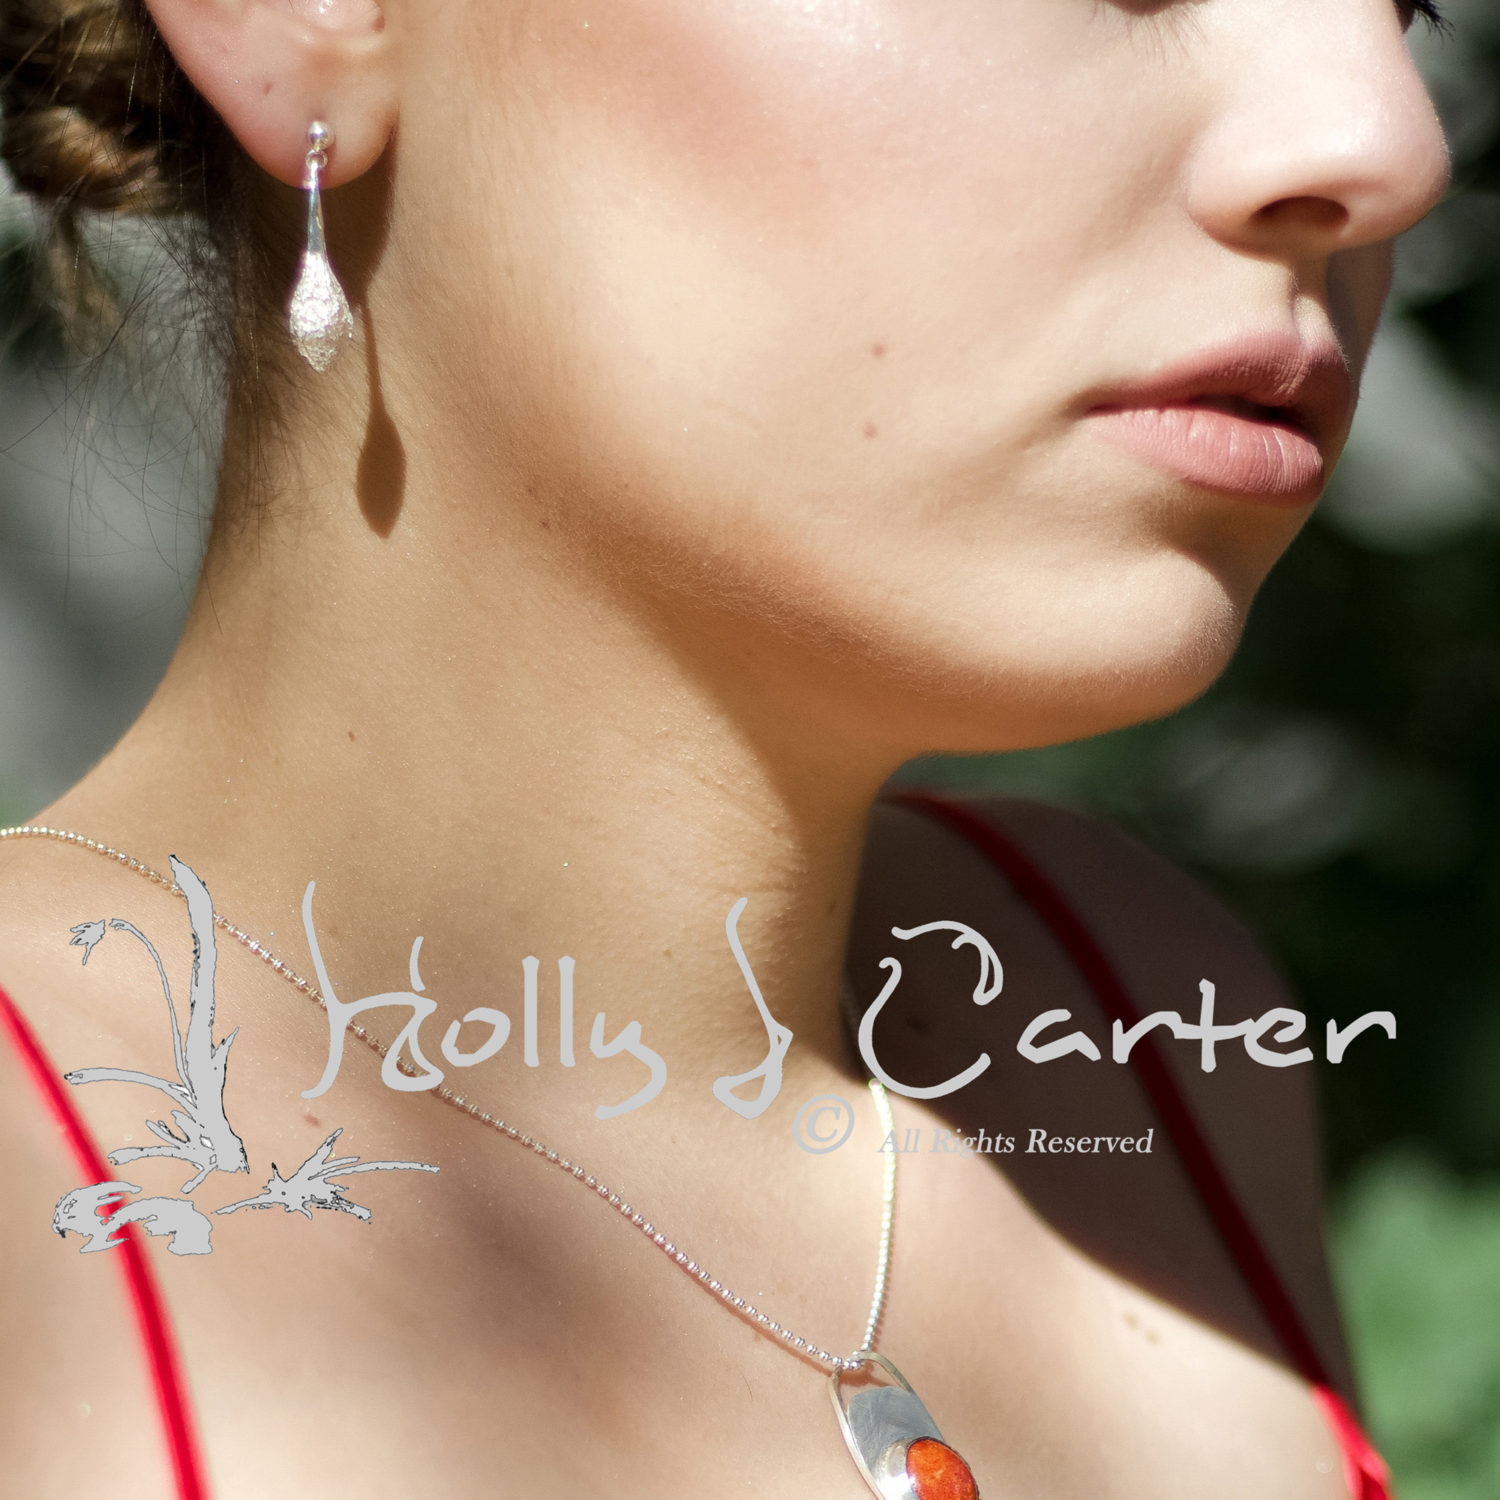 Gum Tree Flower Pod Earrings handcrafted by metals artist Holly J Carter